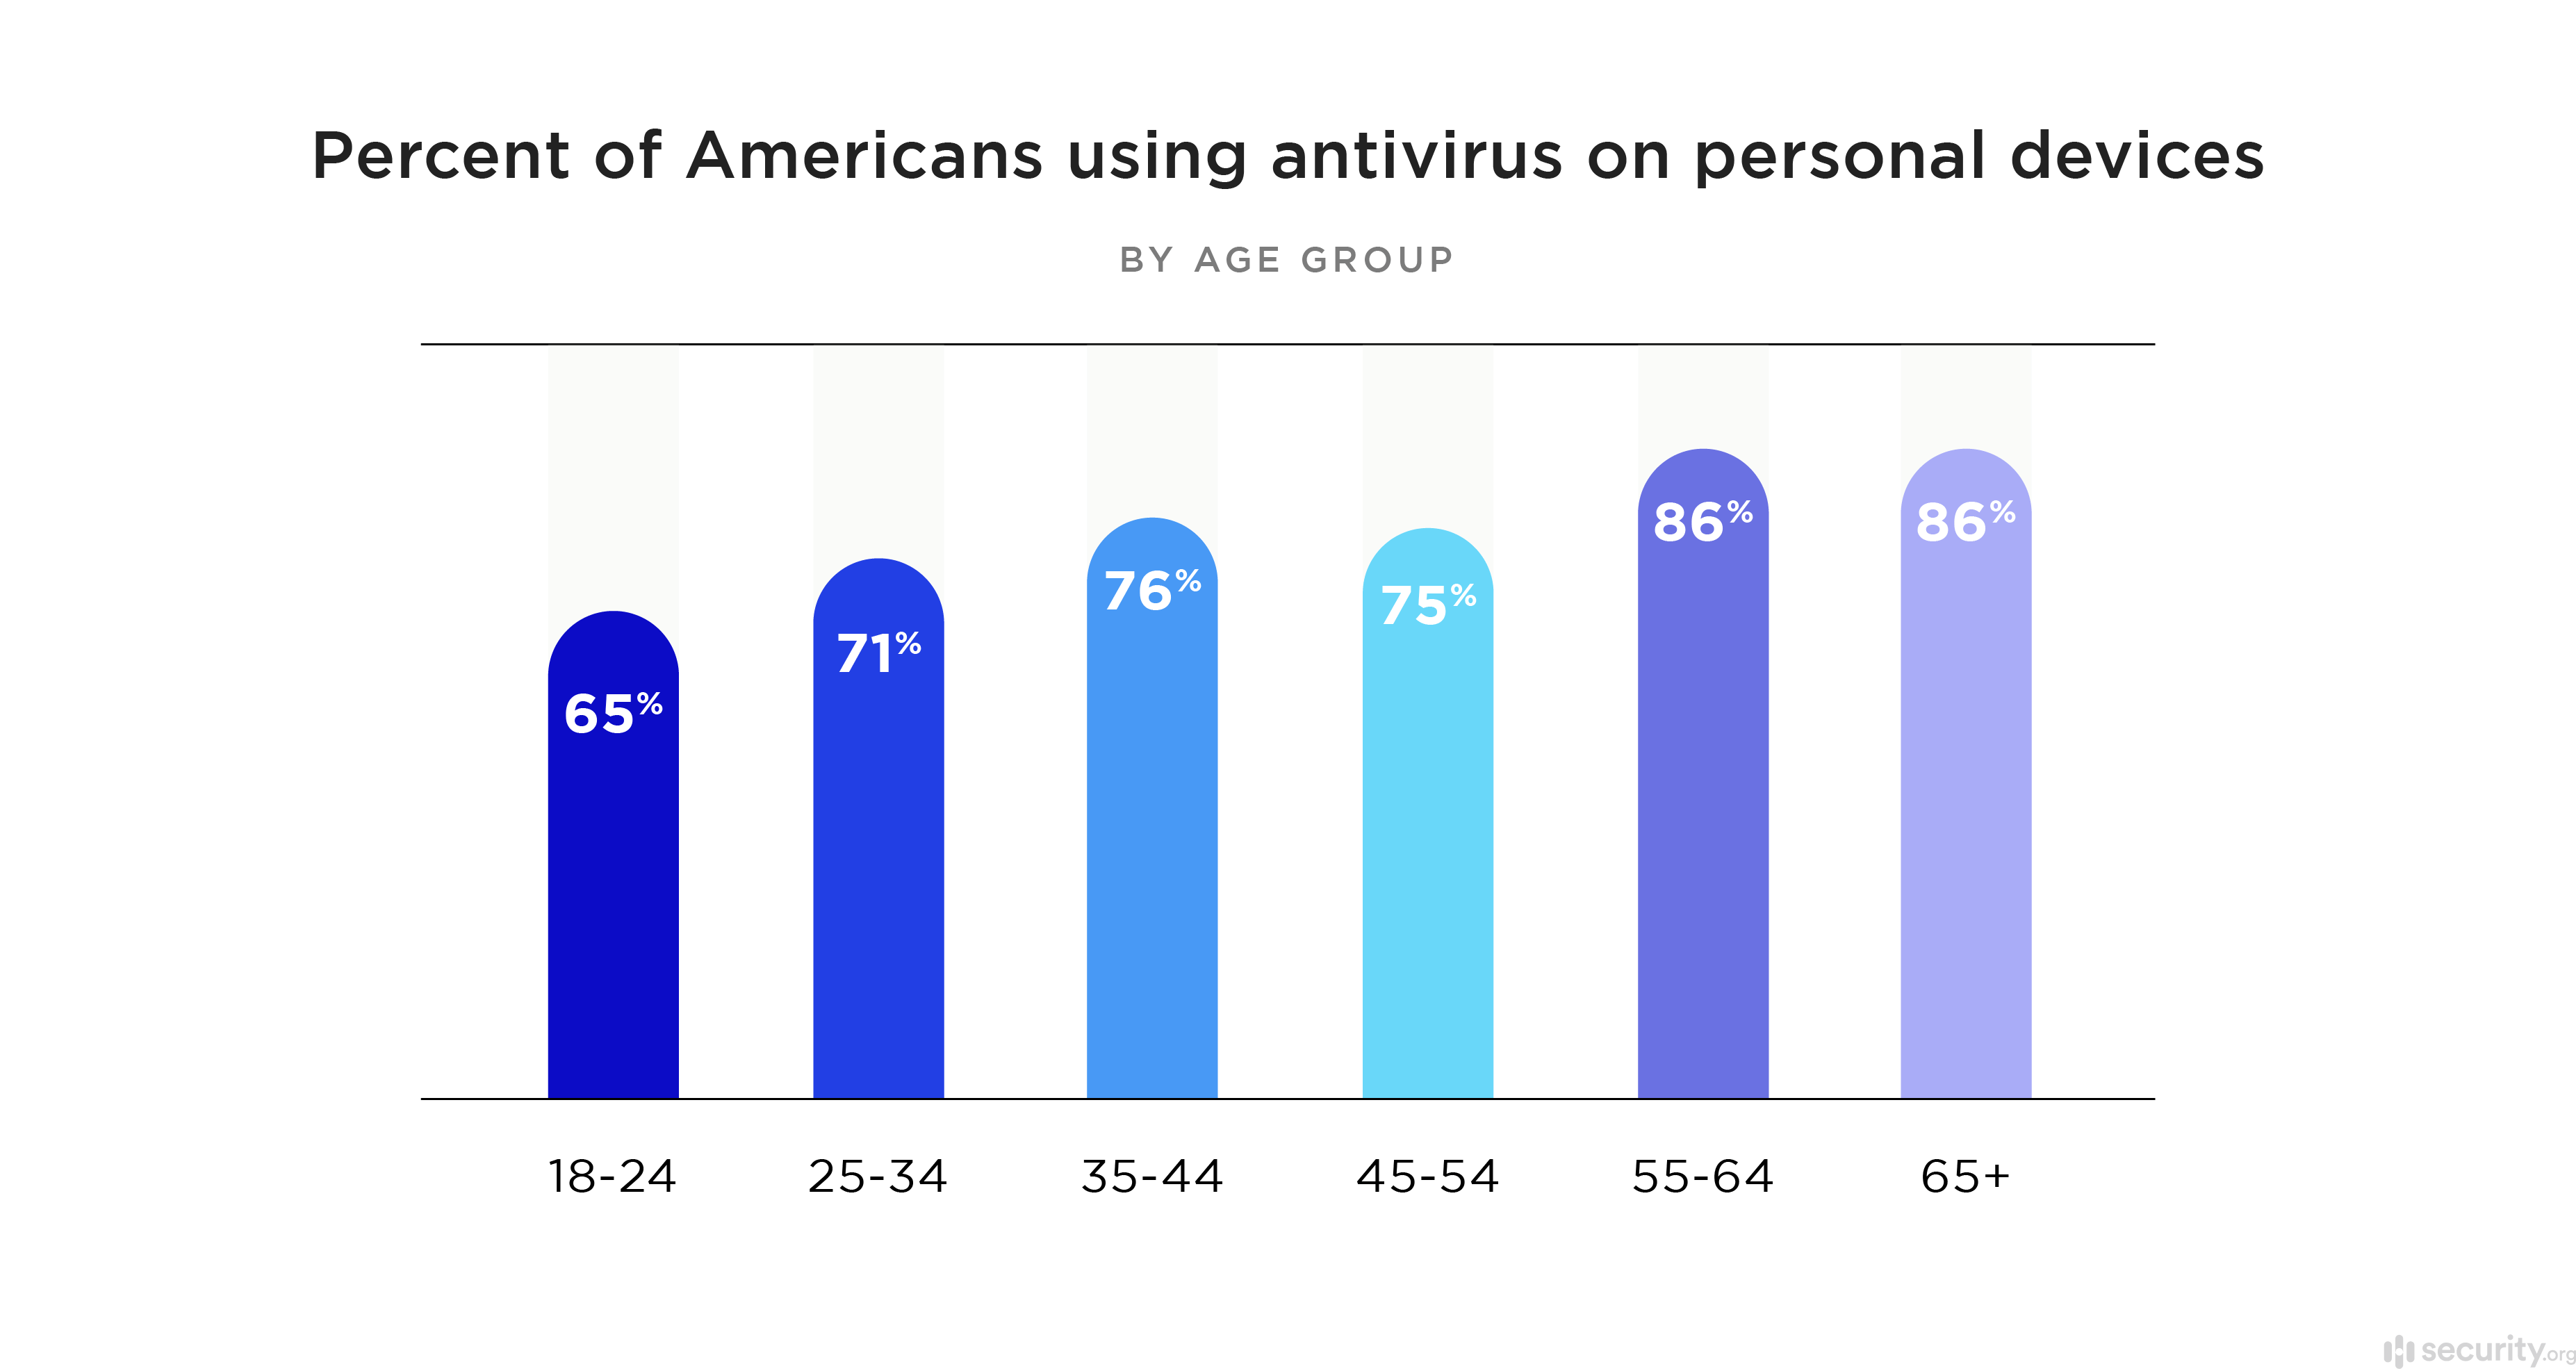 Percent of Americans using antivirus on personal devices